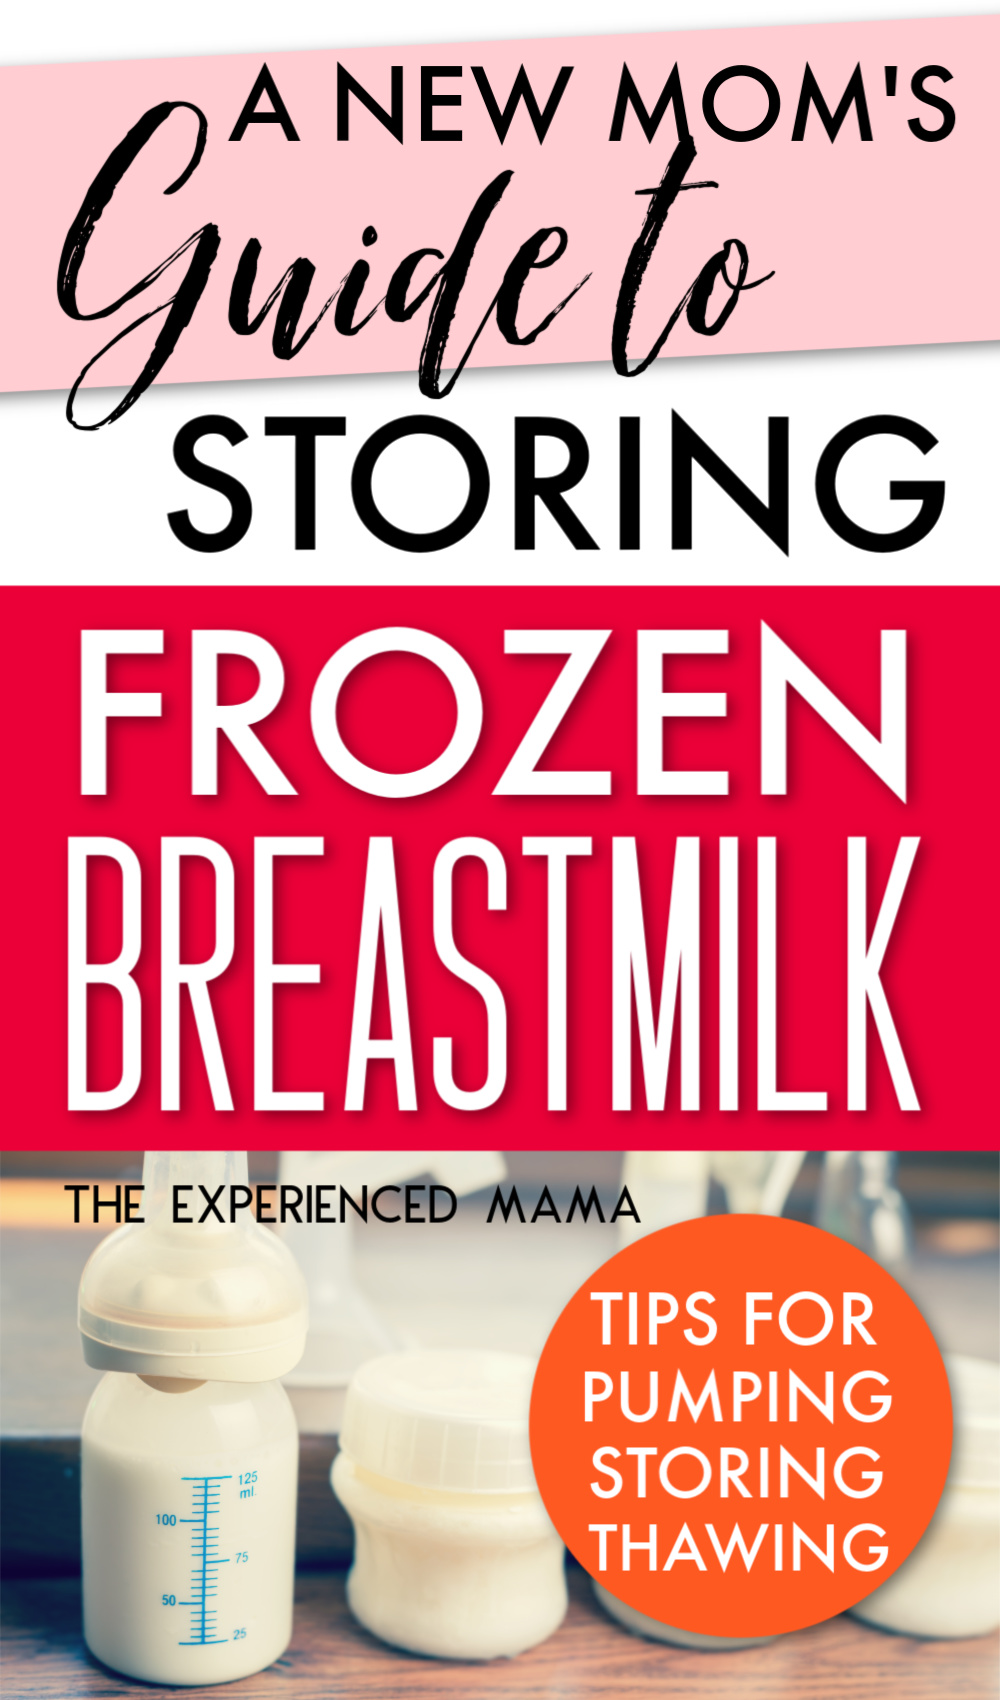 breastmilk lined up in bottles with text overlay "a new mom's guide to storing frozen breastmilk"